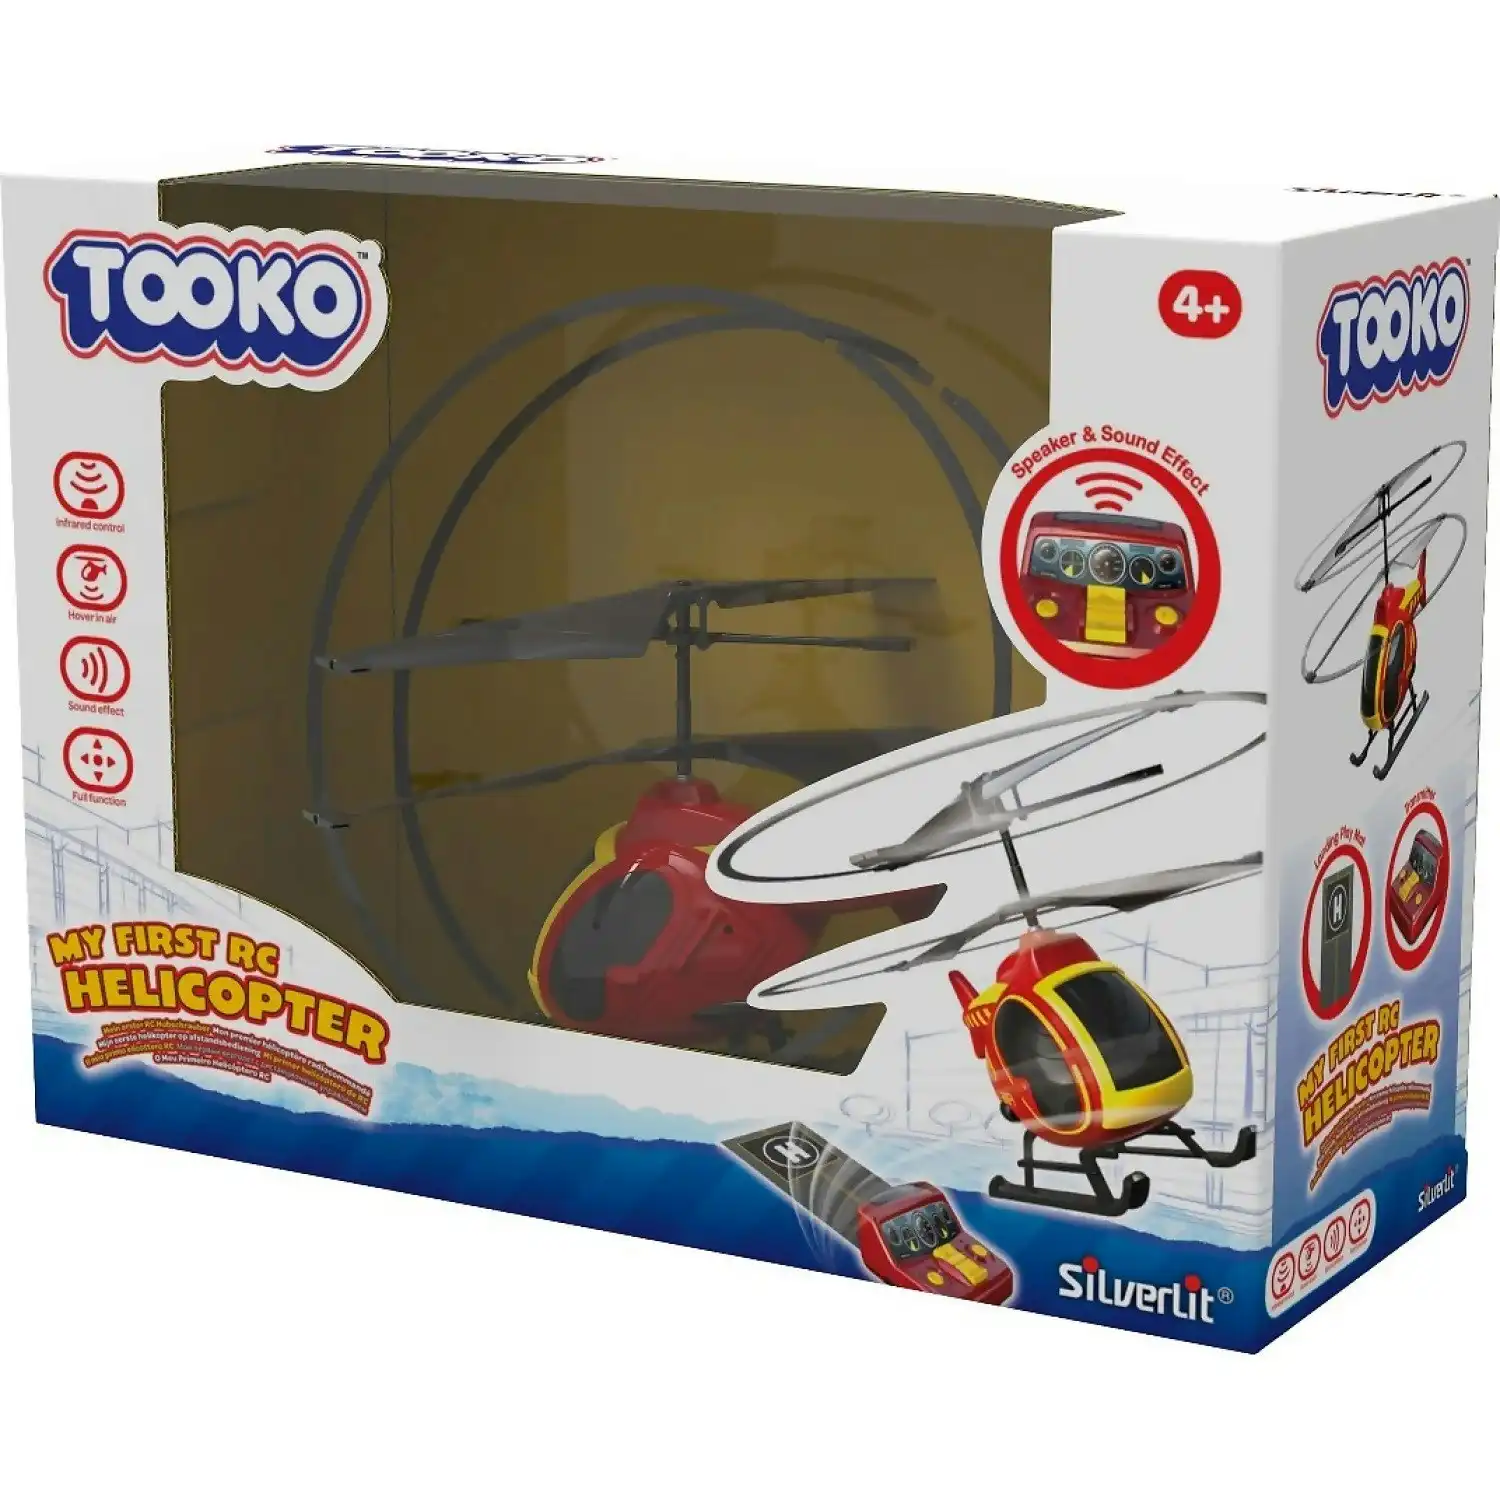 Silverlit - Tooko My First Rc Helicopter